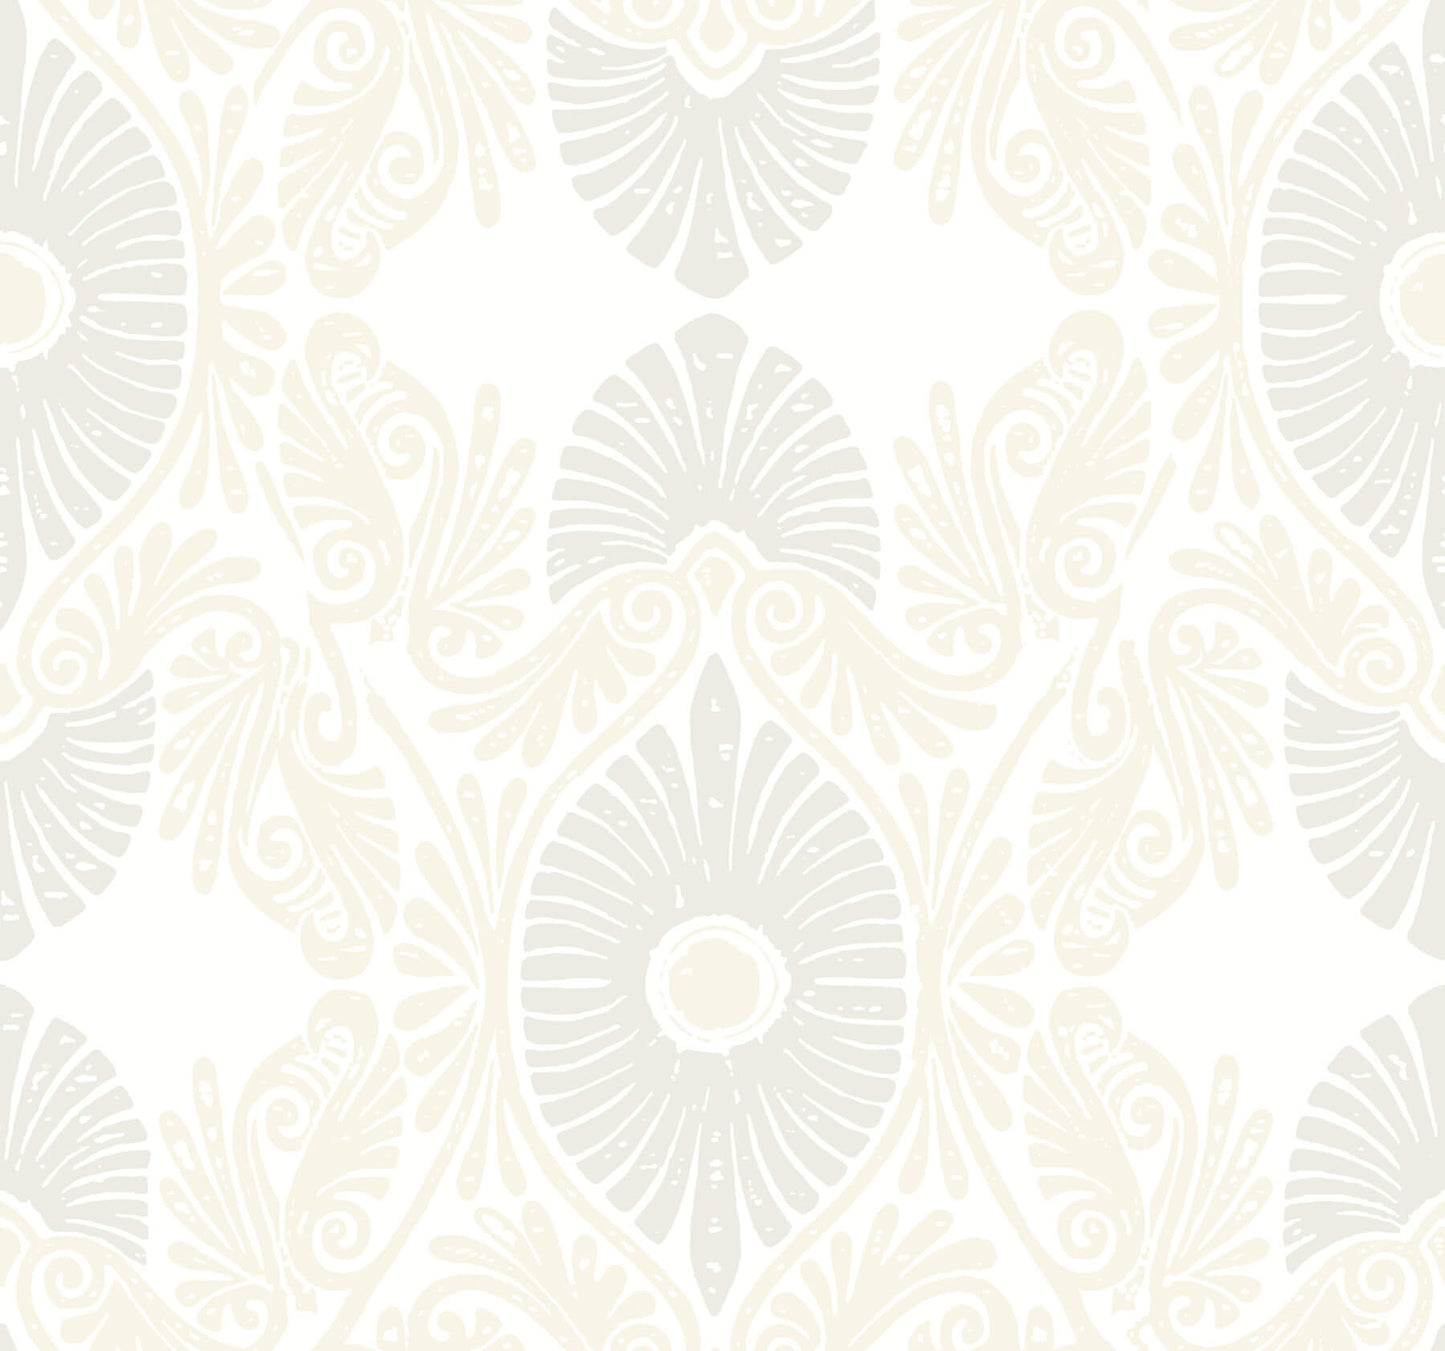 A-Street Prints Terrace Wallpaper Collection - SAMPLE